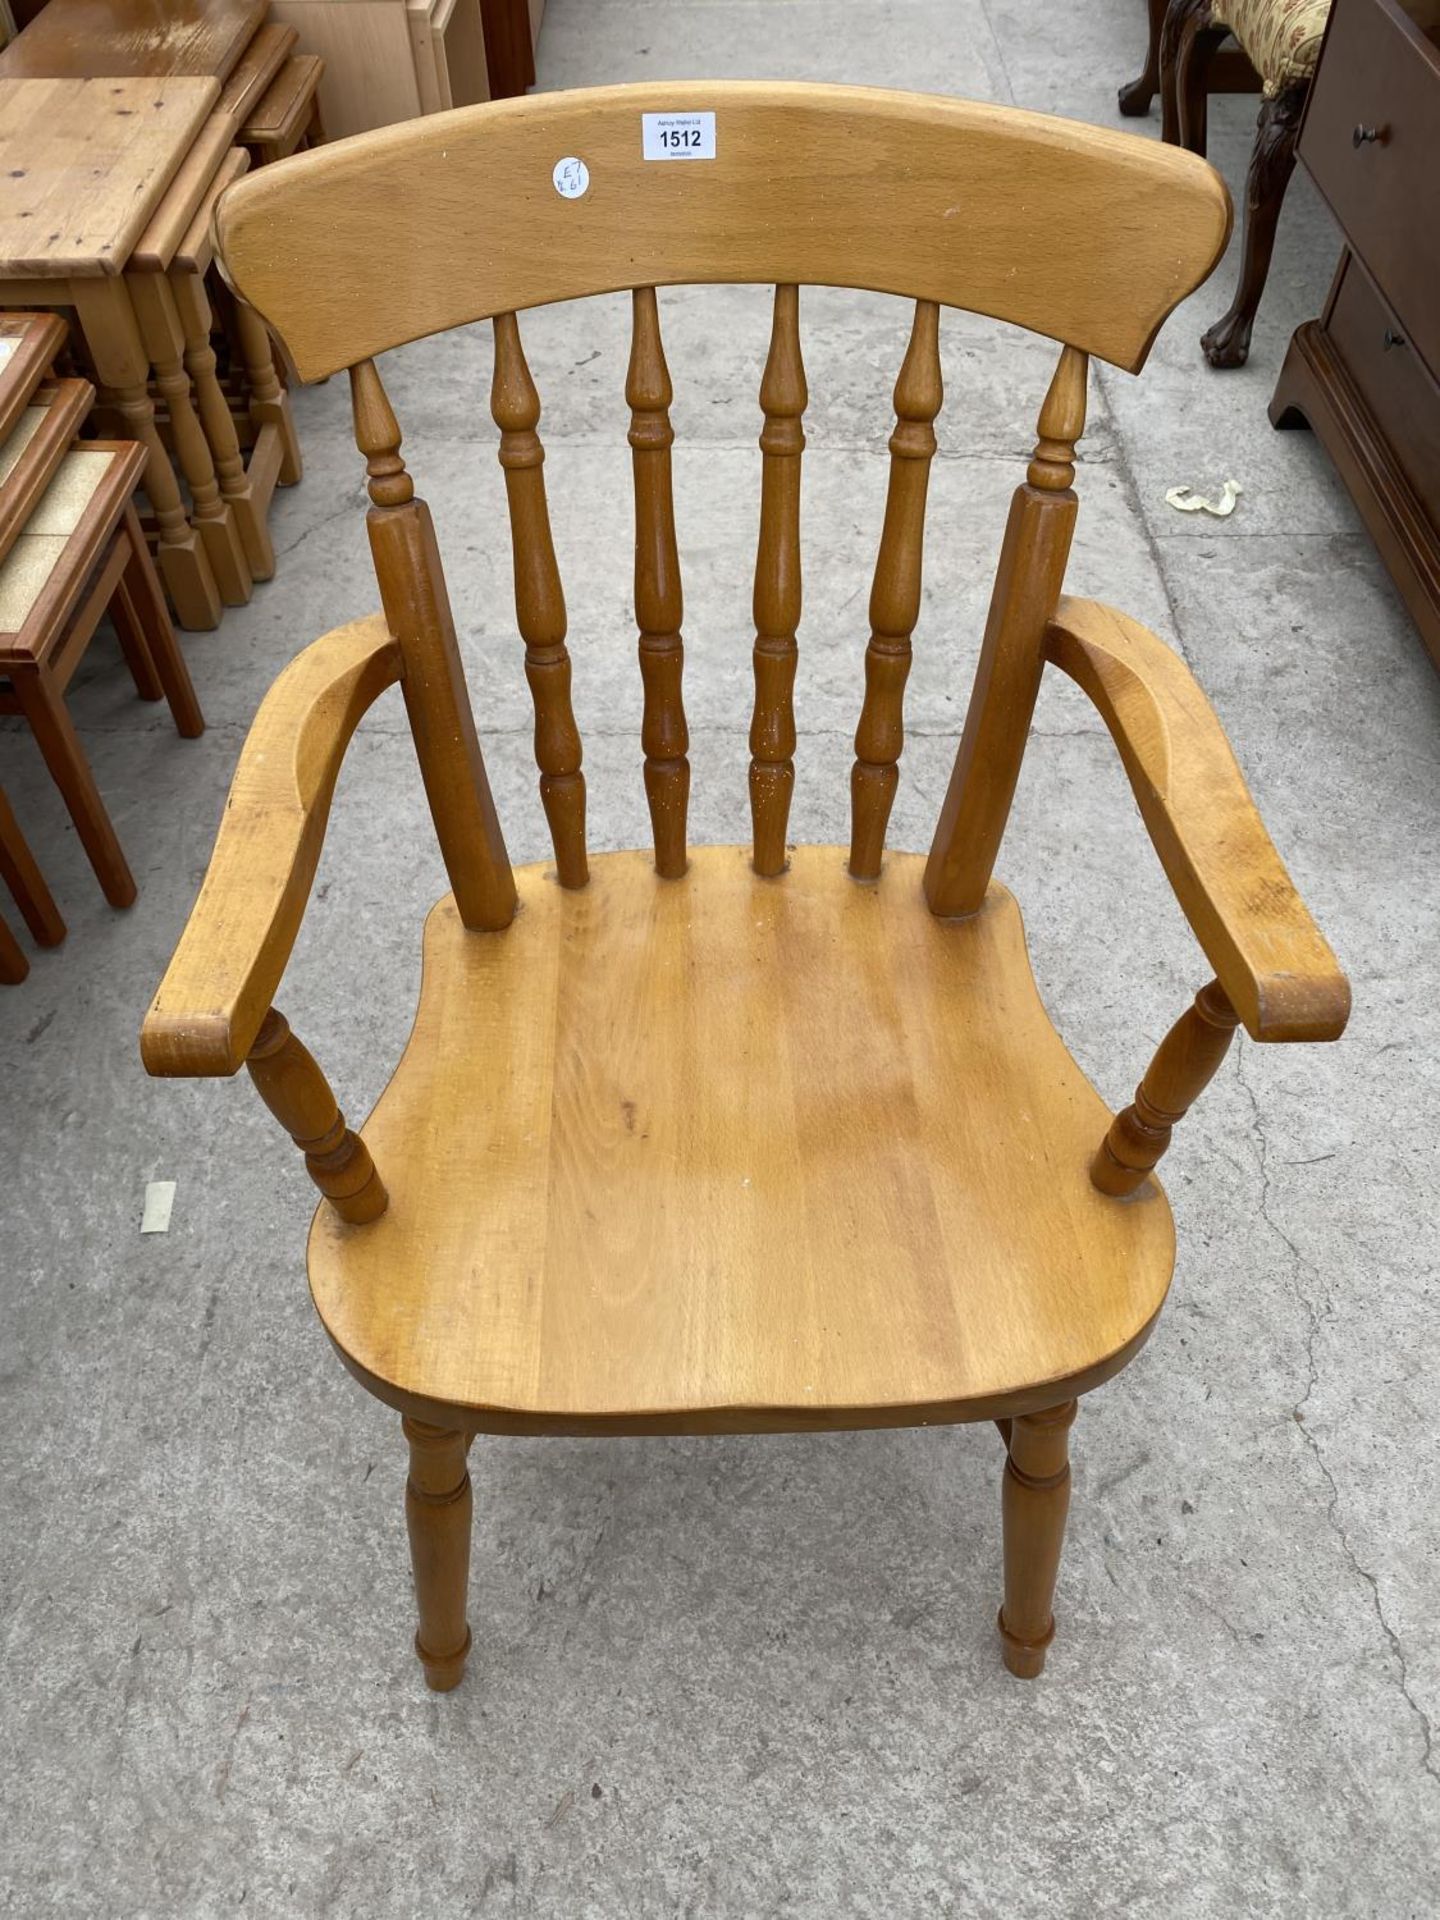 FOUR PINE KITCHEN CHAIRS AND TWO CARVERS - Image 2 of 5